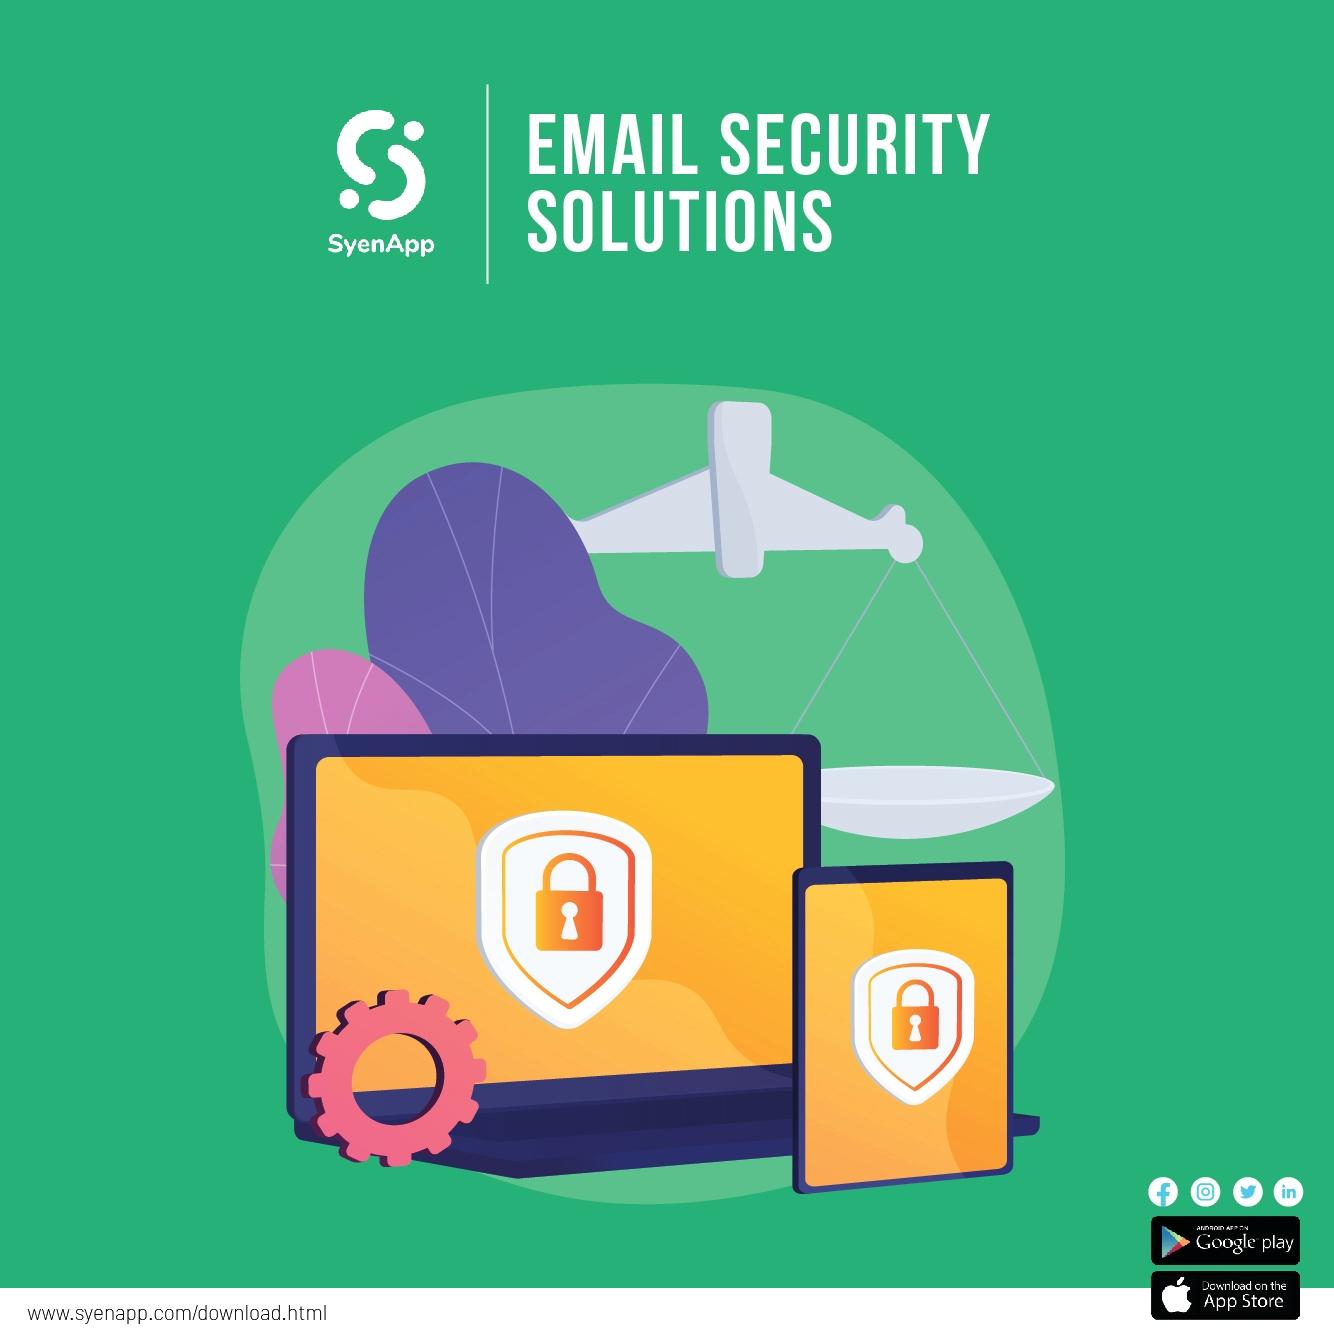 Email security solution